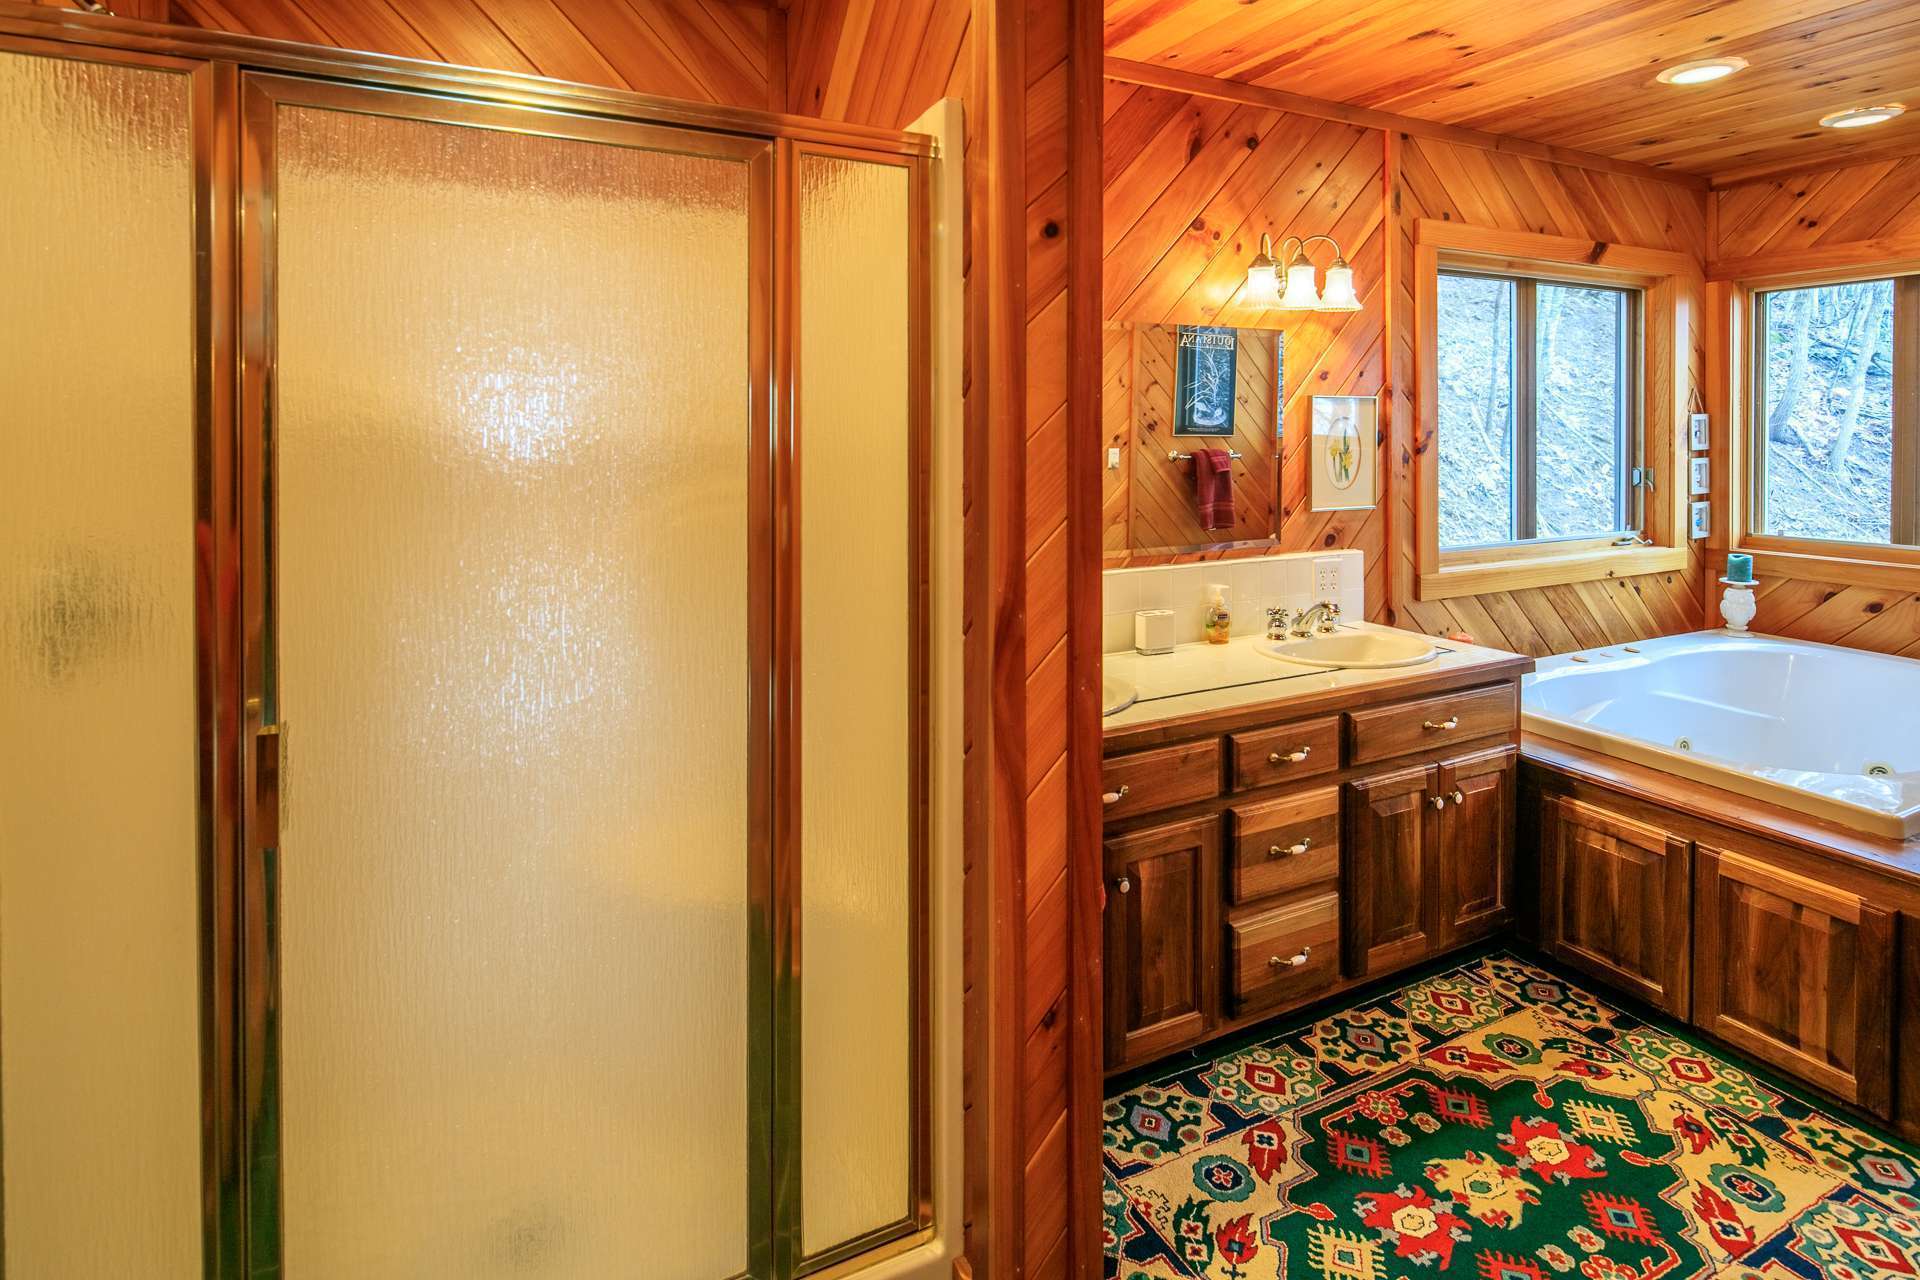 After a fun filled day of mountain activities, enjoy  a spa like experience  in the master bath  with double vanity, jetted tub, and separate shower.